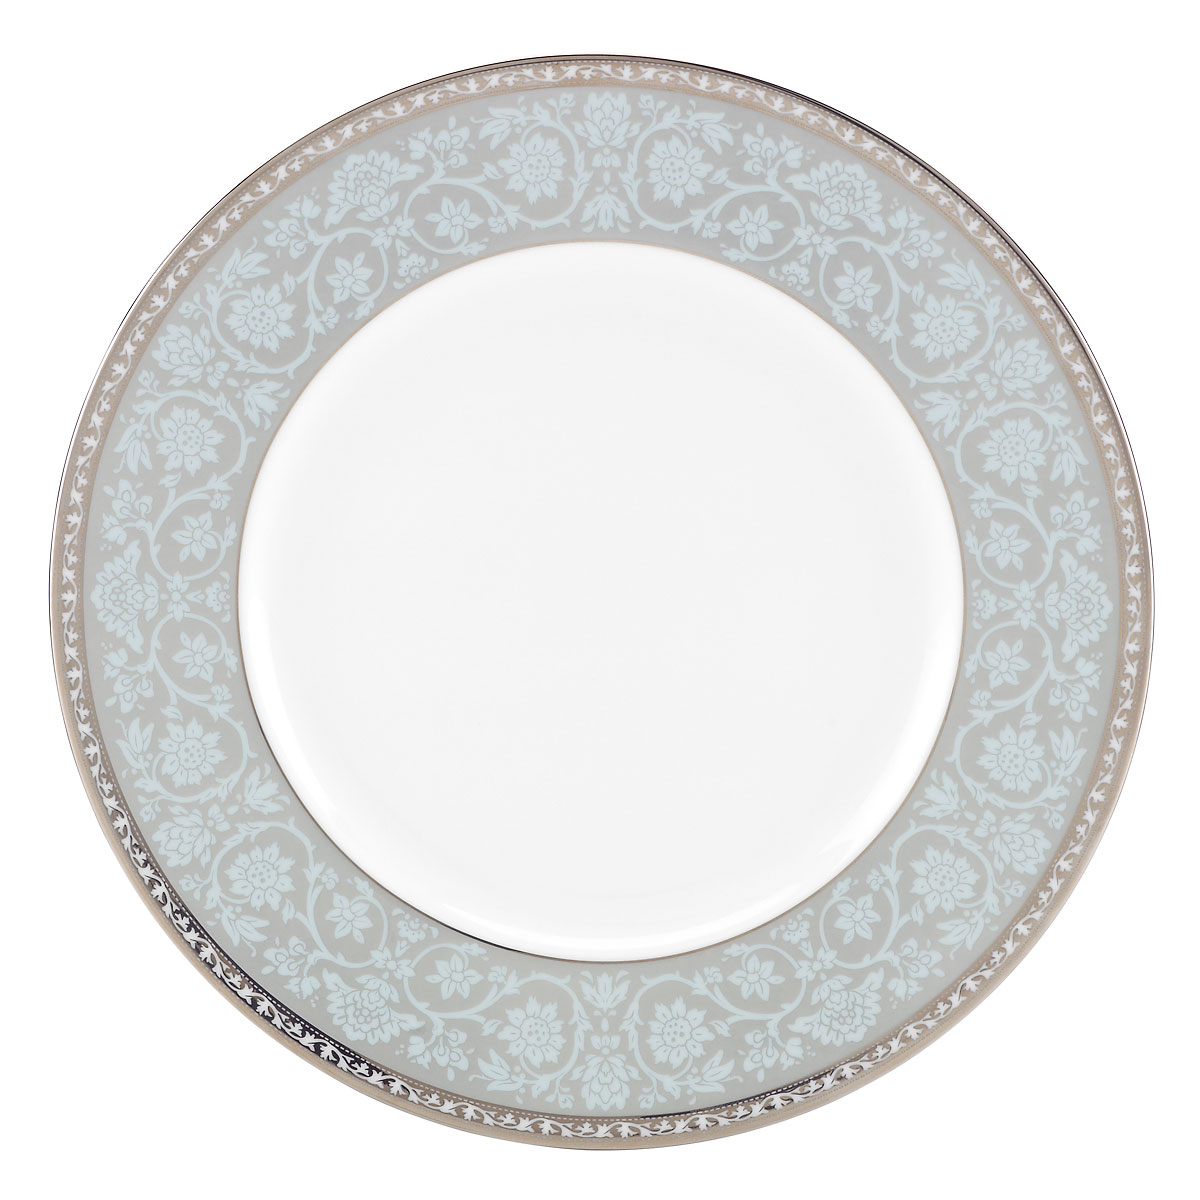 Lenox Westmore China Accent Plate, Single